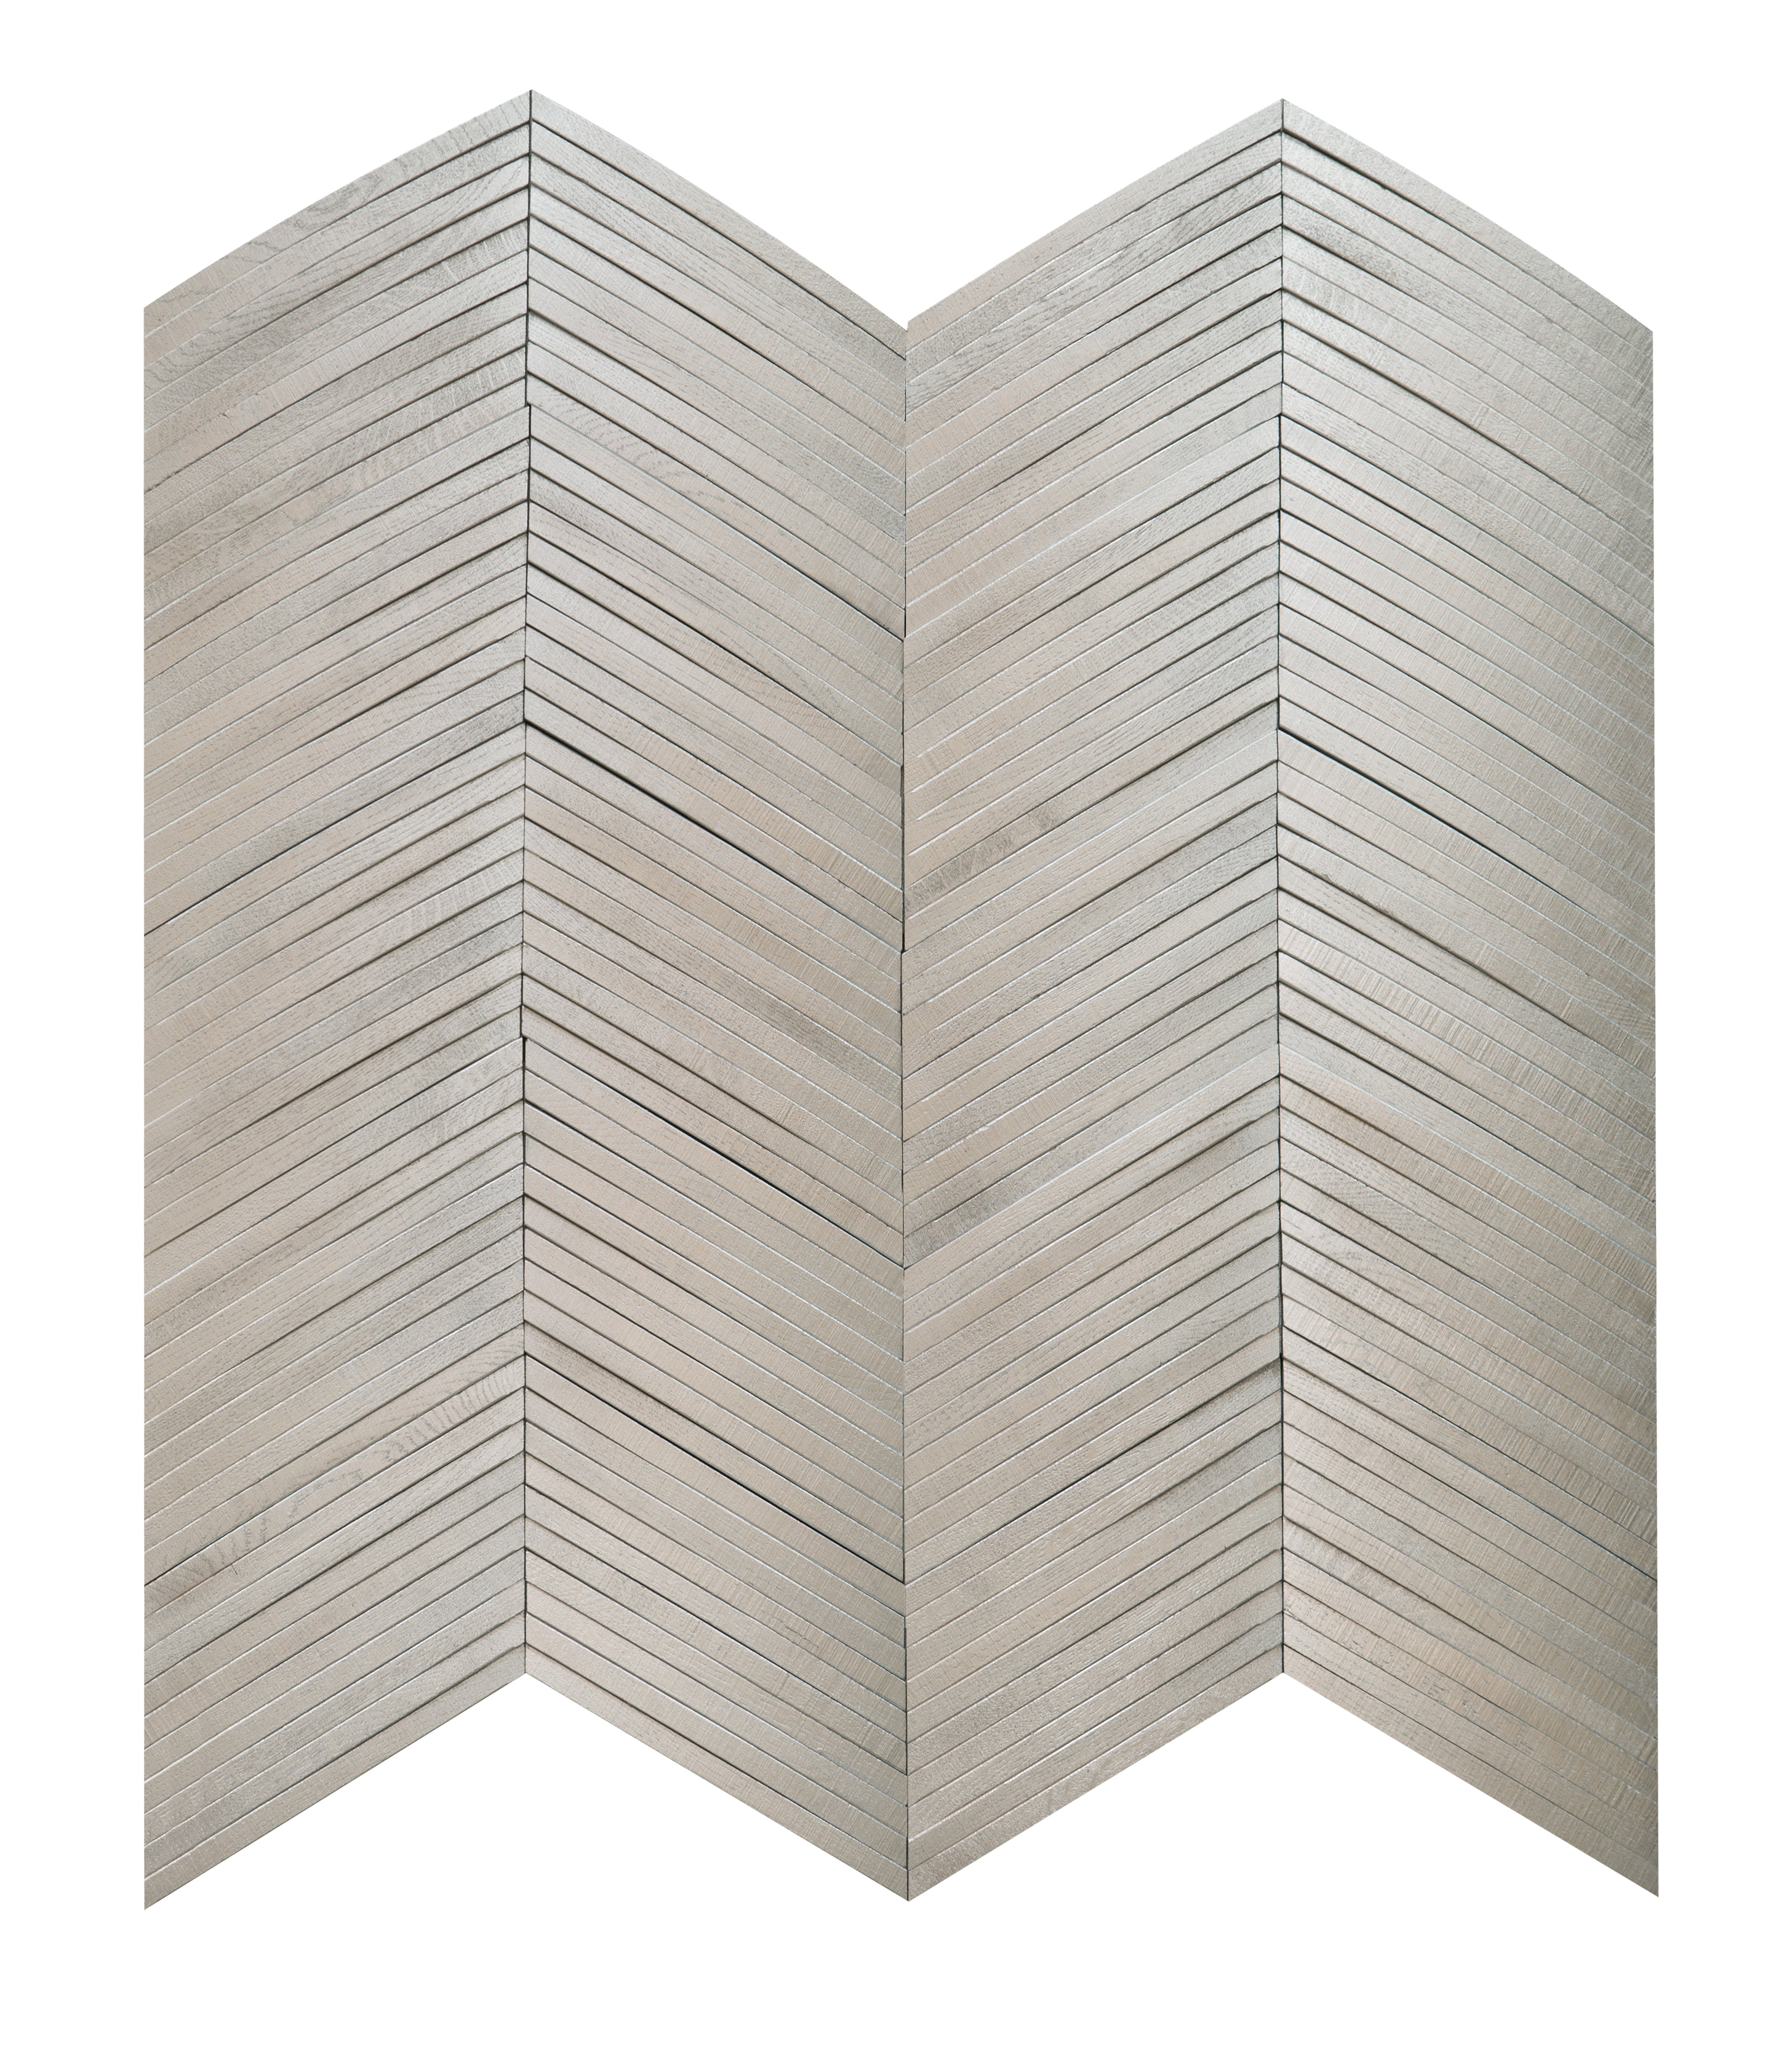 duchateau inceptiv ark chevron silver oak three dimensional wall natural wood panel lacquer for interior use distributed by surface group international